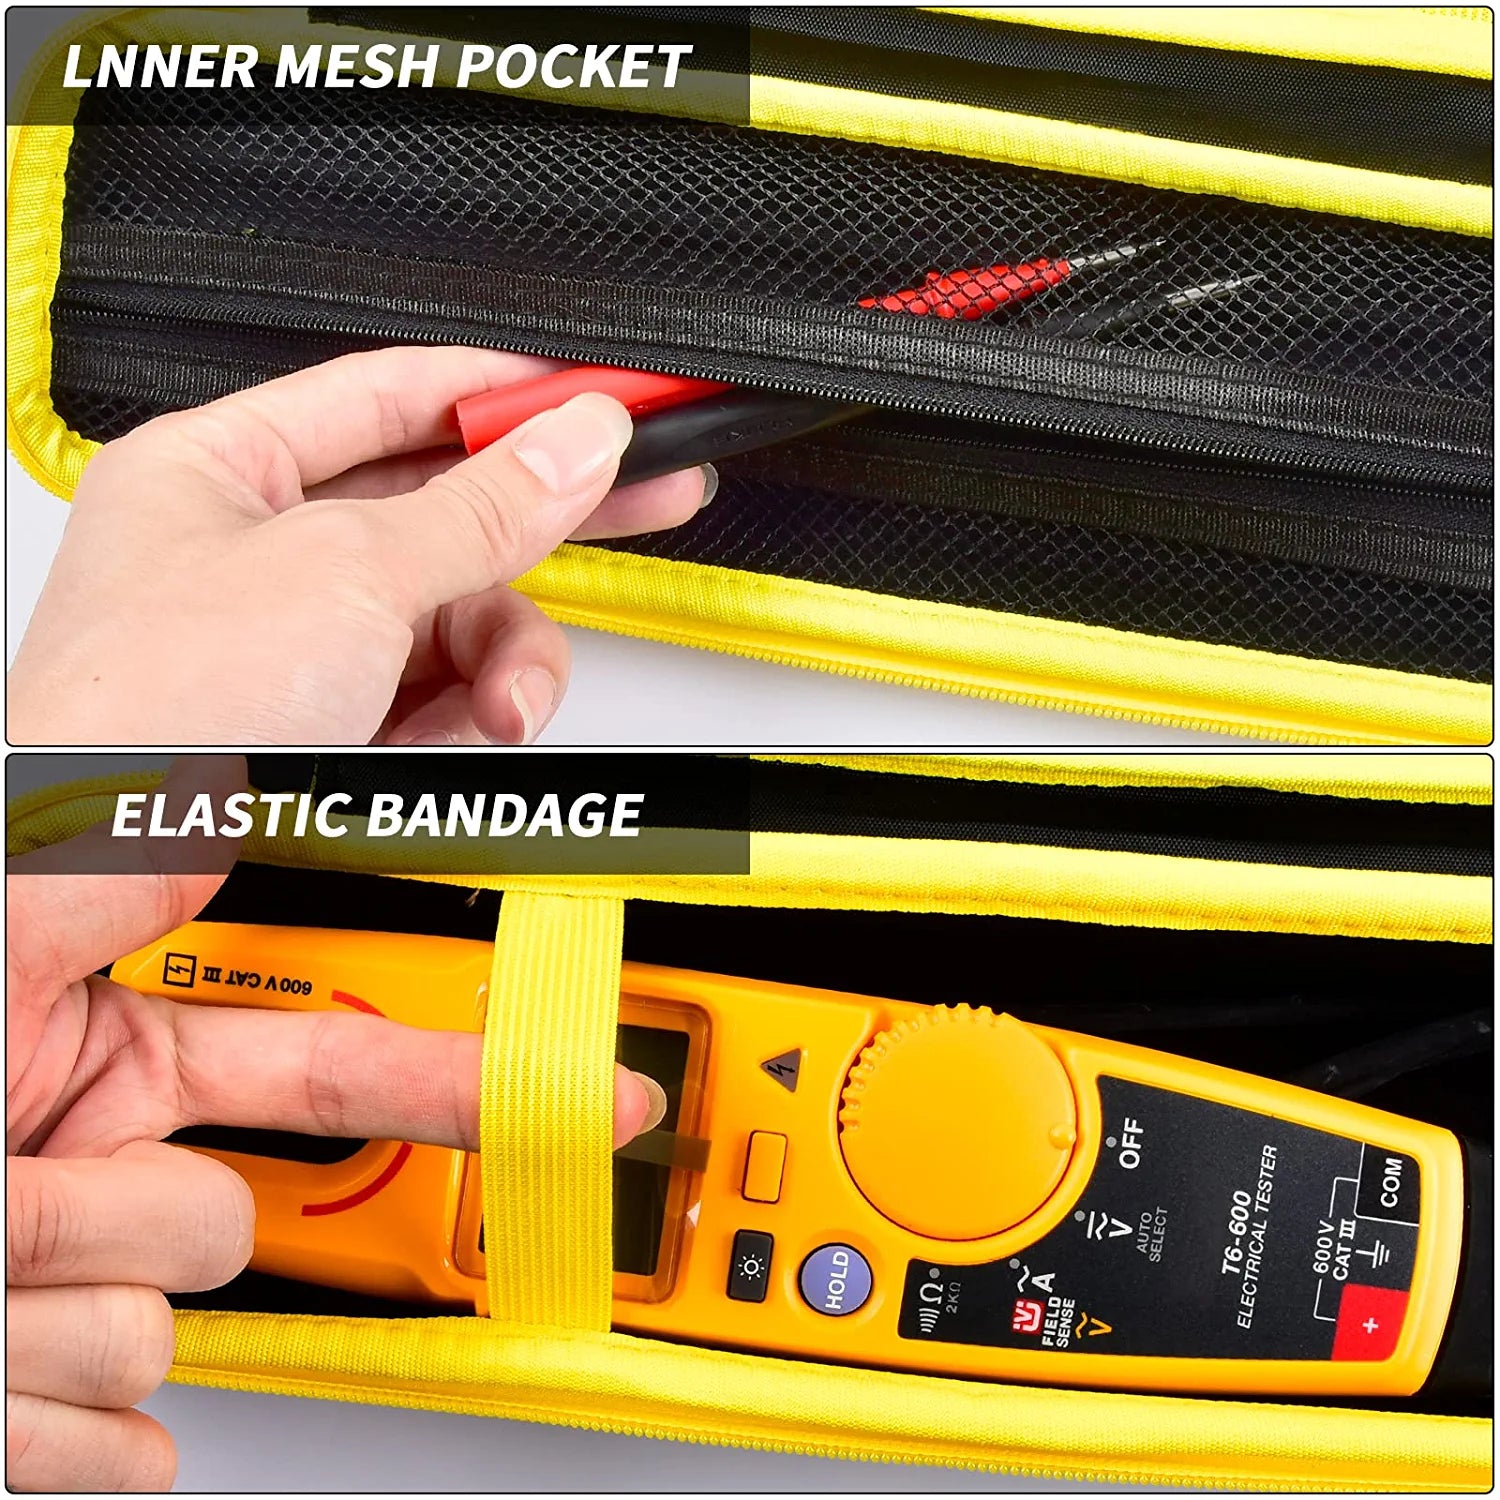 Case Compatible with Fluke T5-1000/ T5-600/ T6-1000/ T6-600/ T+PRO Electrical Voltage, Continuity and Current Tester Multimeter Kit Storage Organizer Holder (Box Only) - Yellow